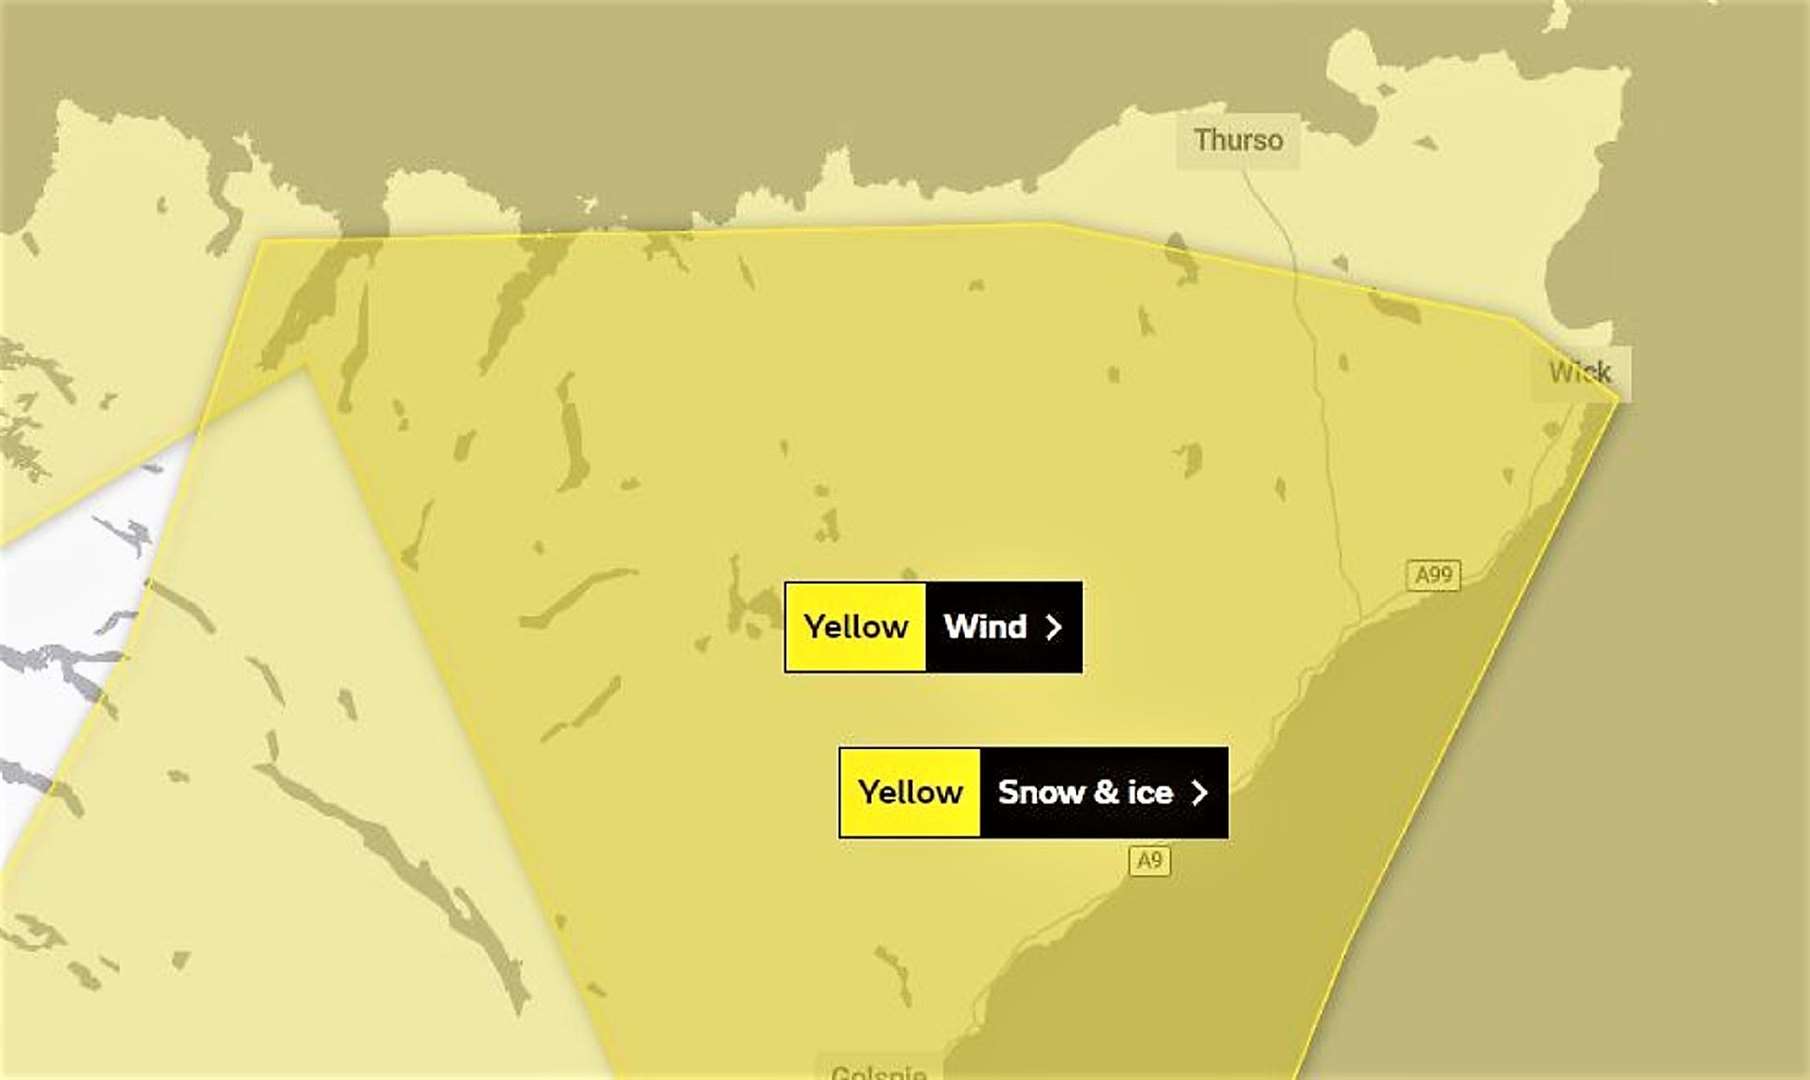 The Met Office issued yellow warnings about strengthening winds as well as snow and ice affecting Caithness on Tuesday.